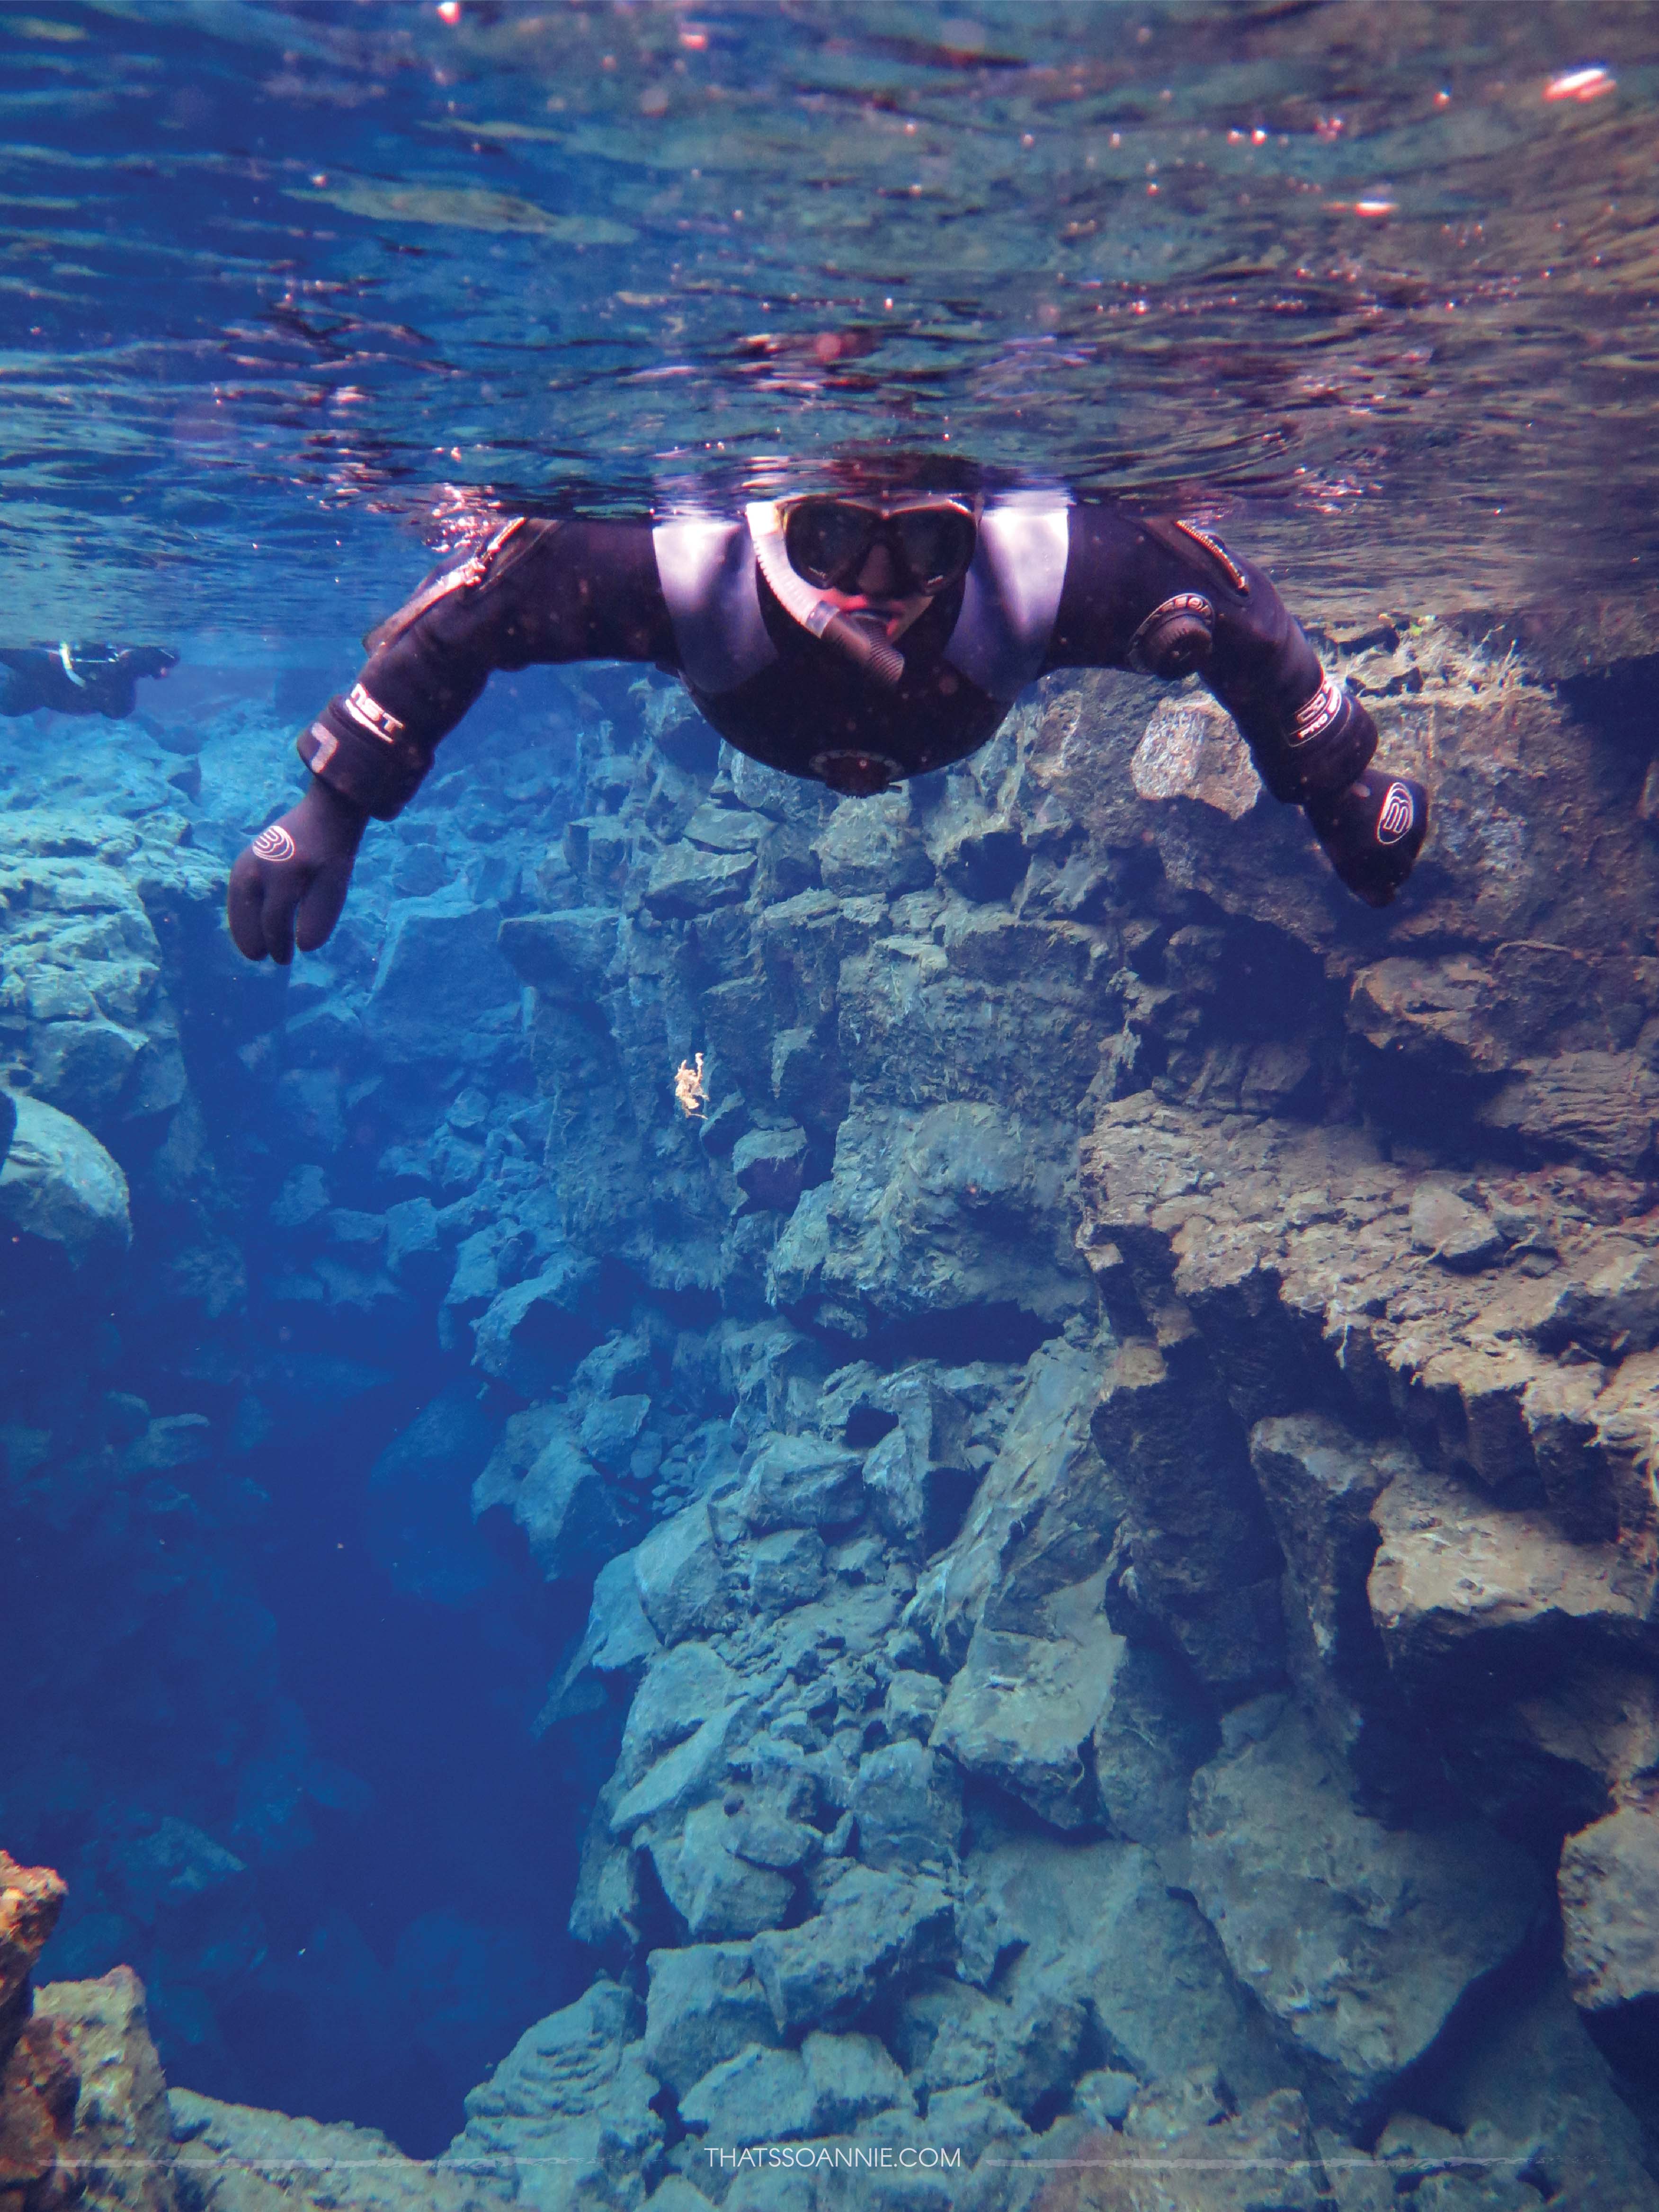 Snorkeling between American and Eurasian Tectonic Plates at Silfra Fissure, Iceland | www.thatssoannie.com